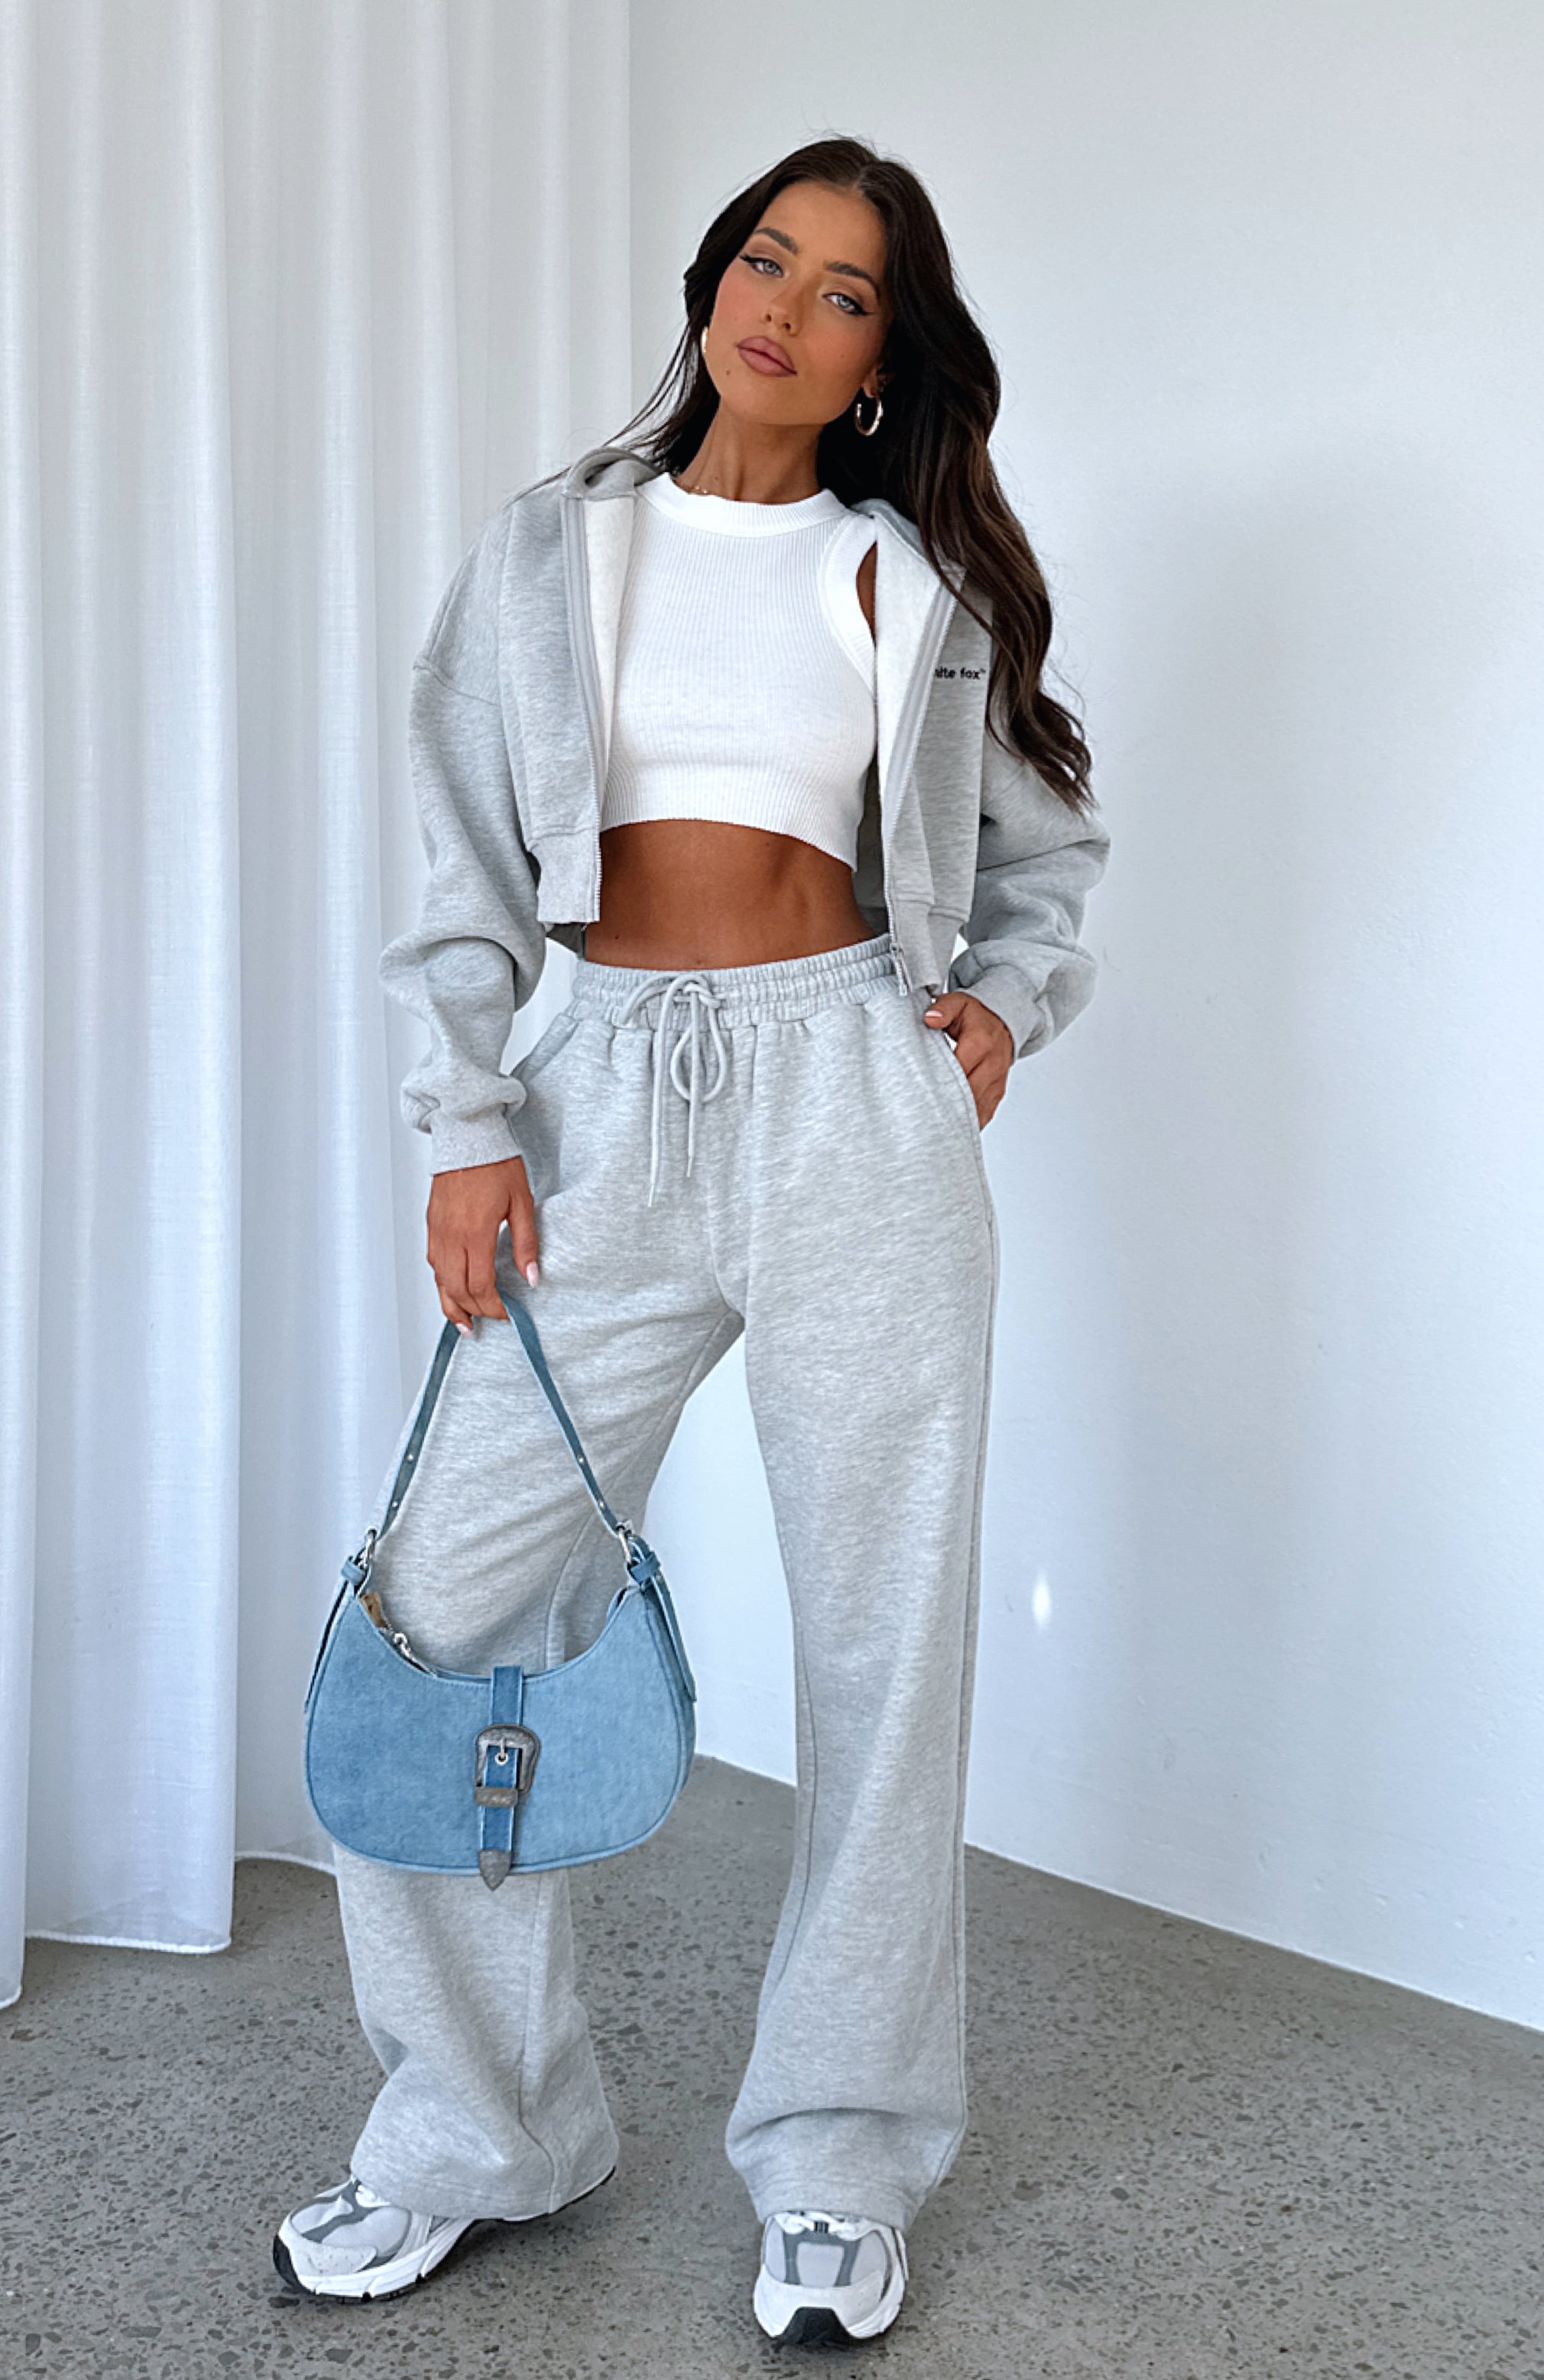 The Cropped Sweatpants